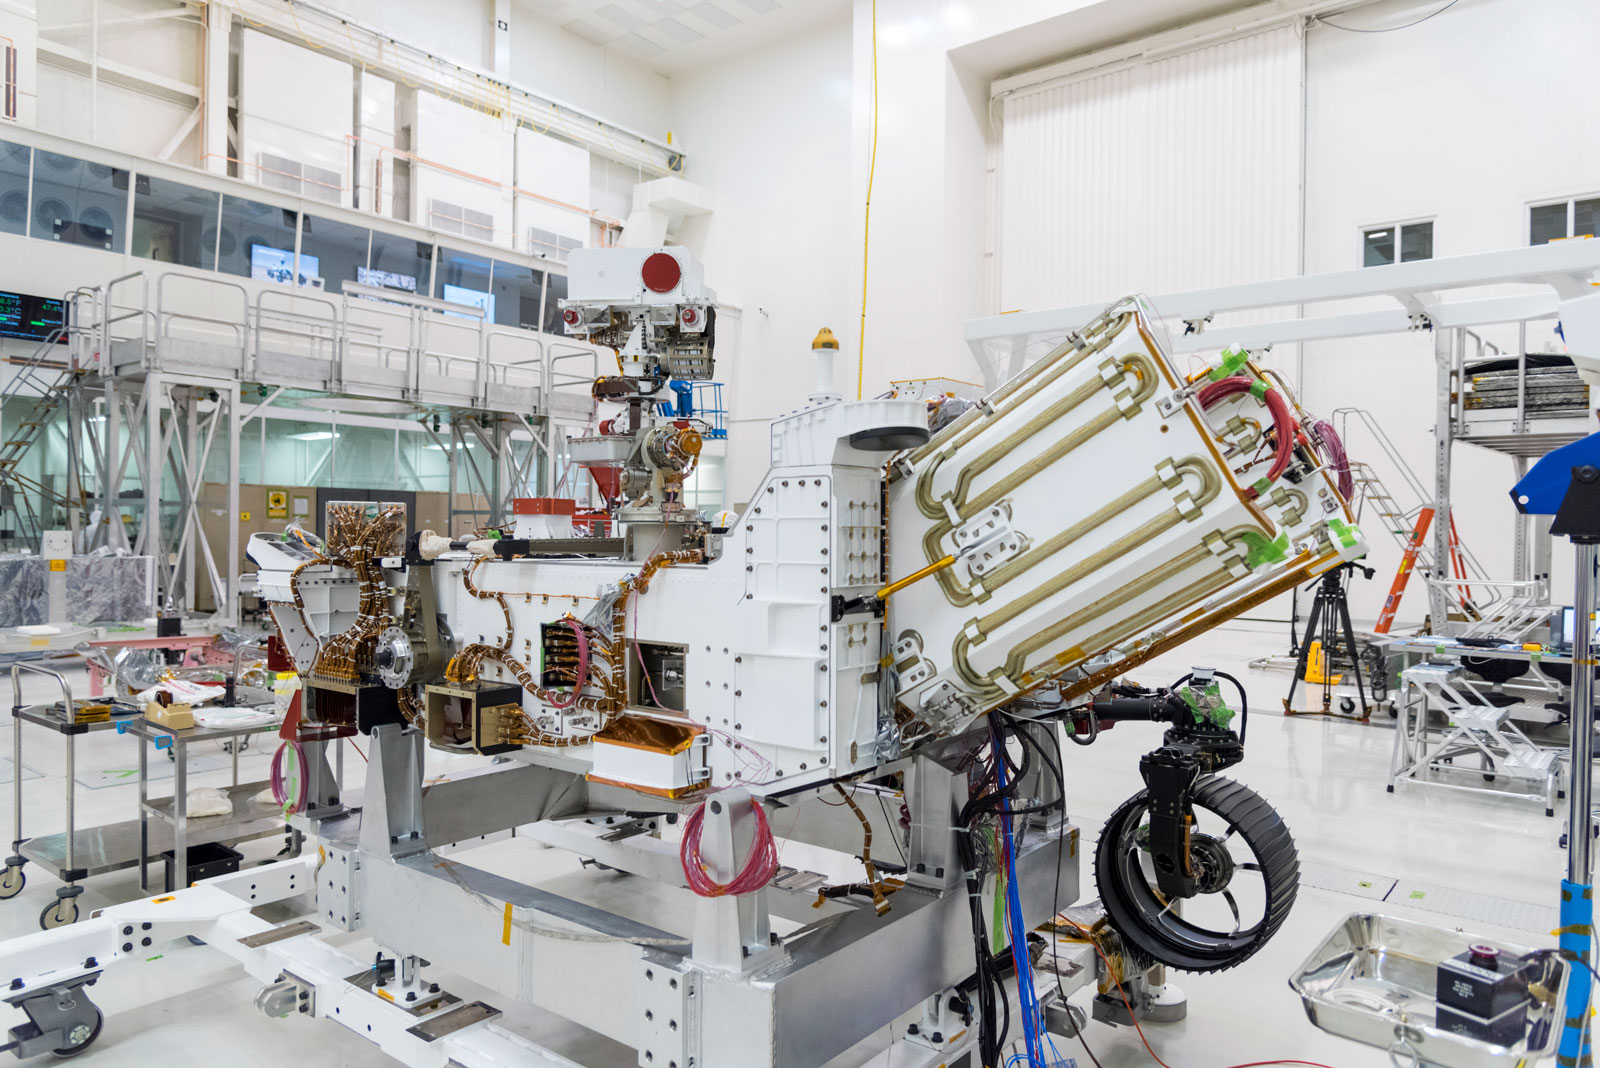 The electricity for NASA's Mars 2020 rover is provided by a power system called a Multi-Mission Radioisotope Thermoelectric Generator, or MMRTG. The MMRTG will be inserted into the aft end of the rover between the panels with gold tubing visible at the rear, which are called heat exchangers.